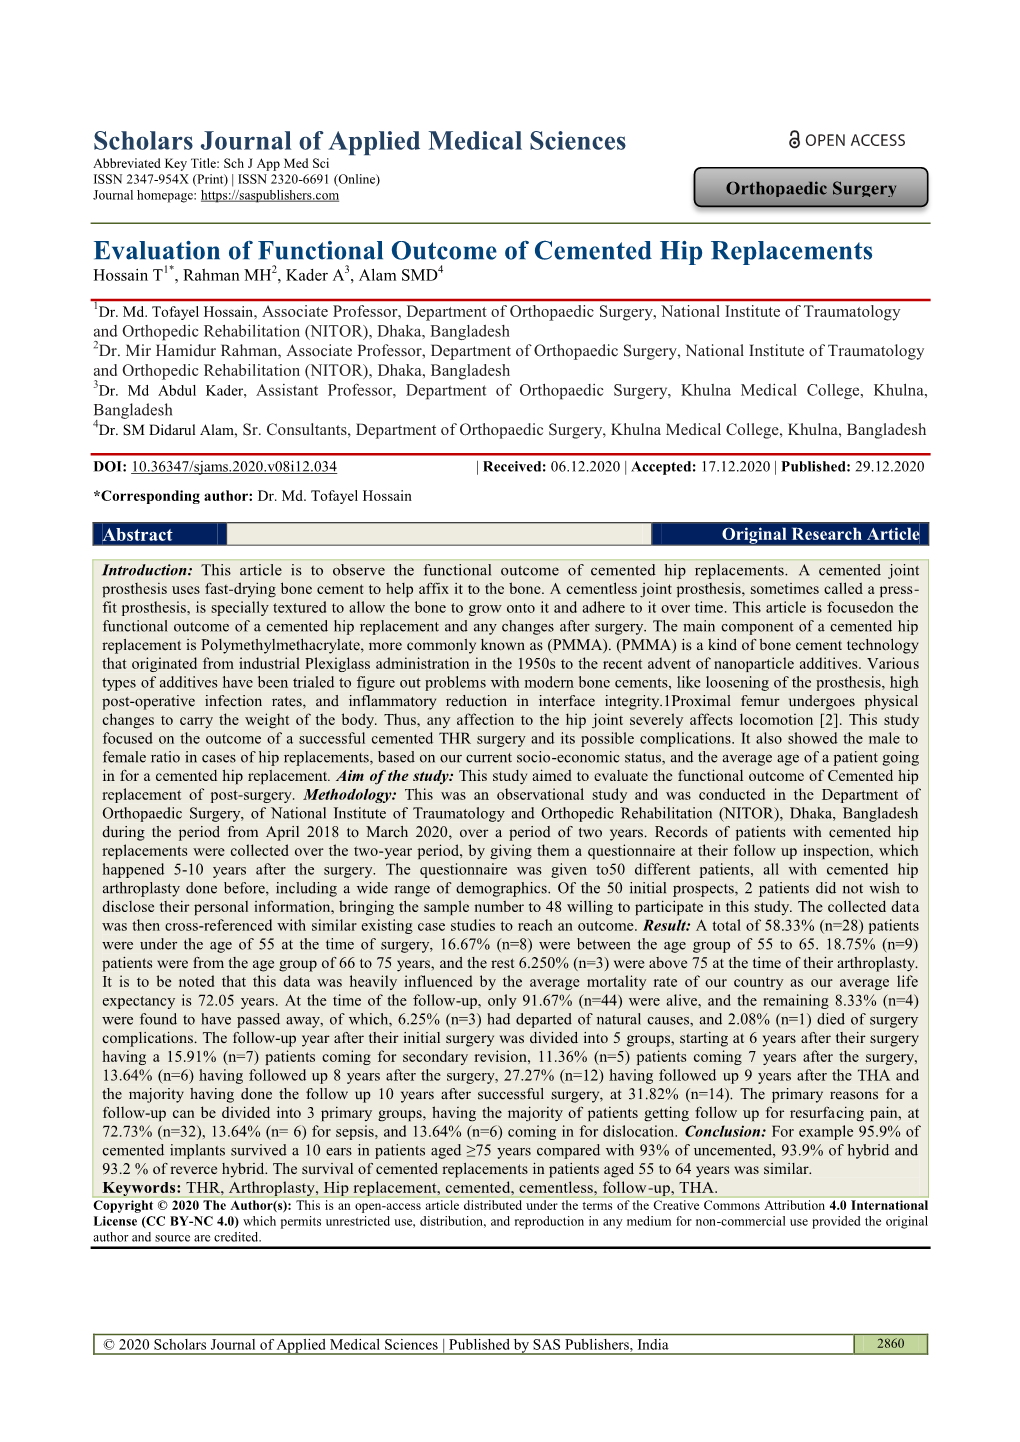 Evaluation of Functional Outcome of Cemented Hip Replacements Hossain T1*, Rahman MH2, Kader A3, Alam SMD4